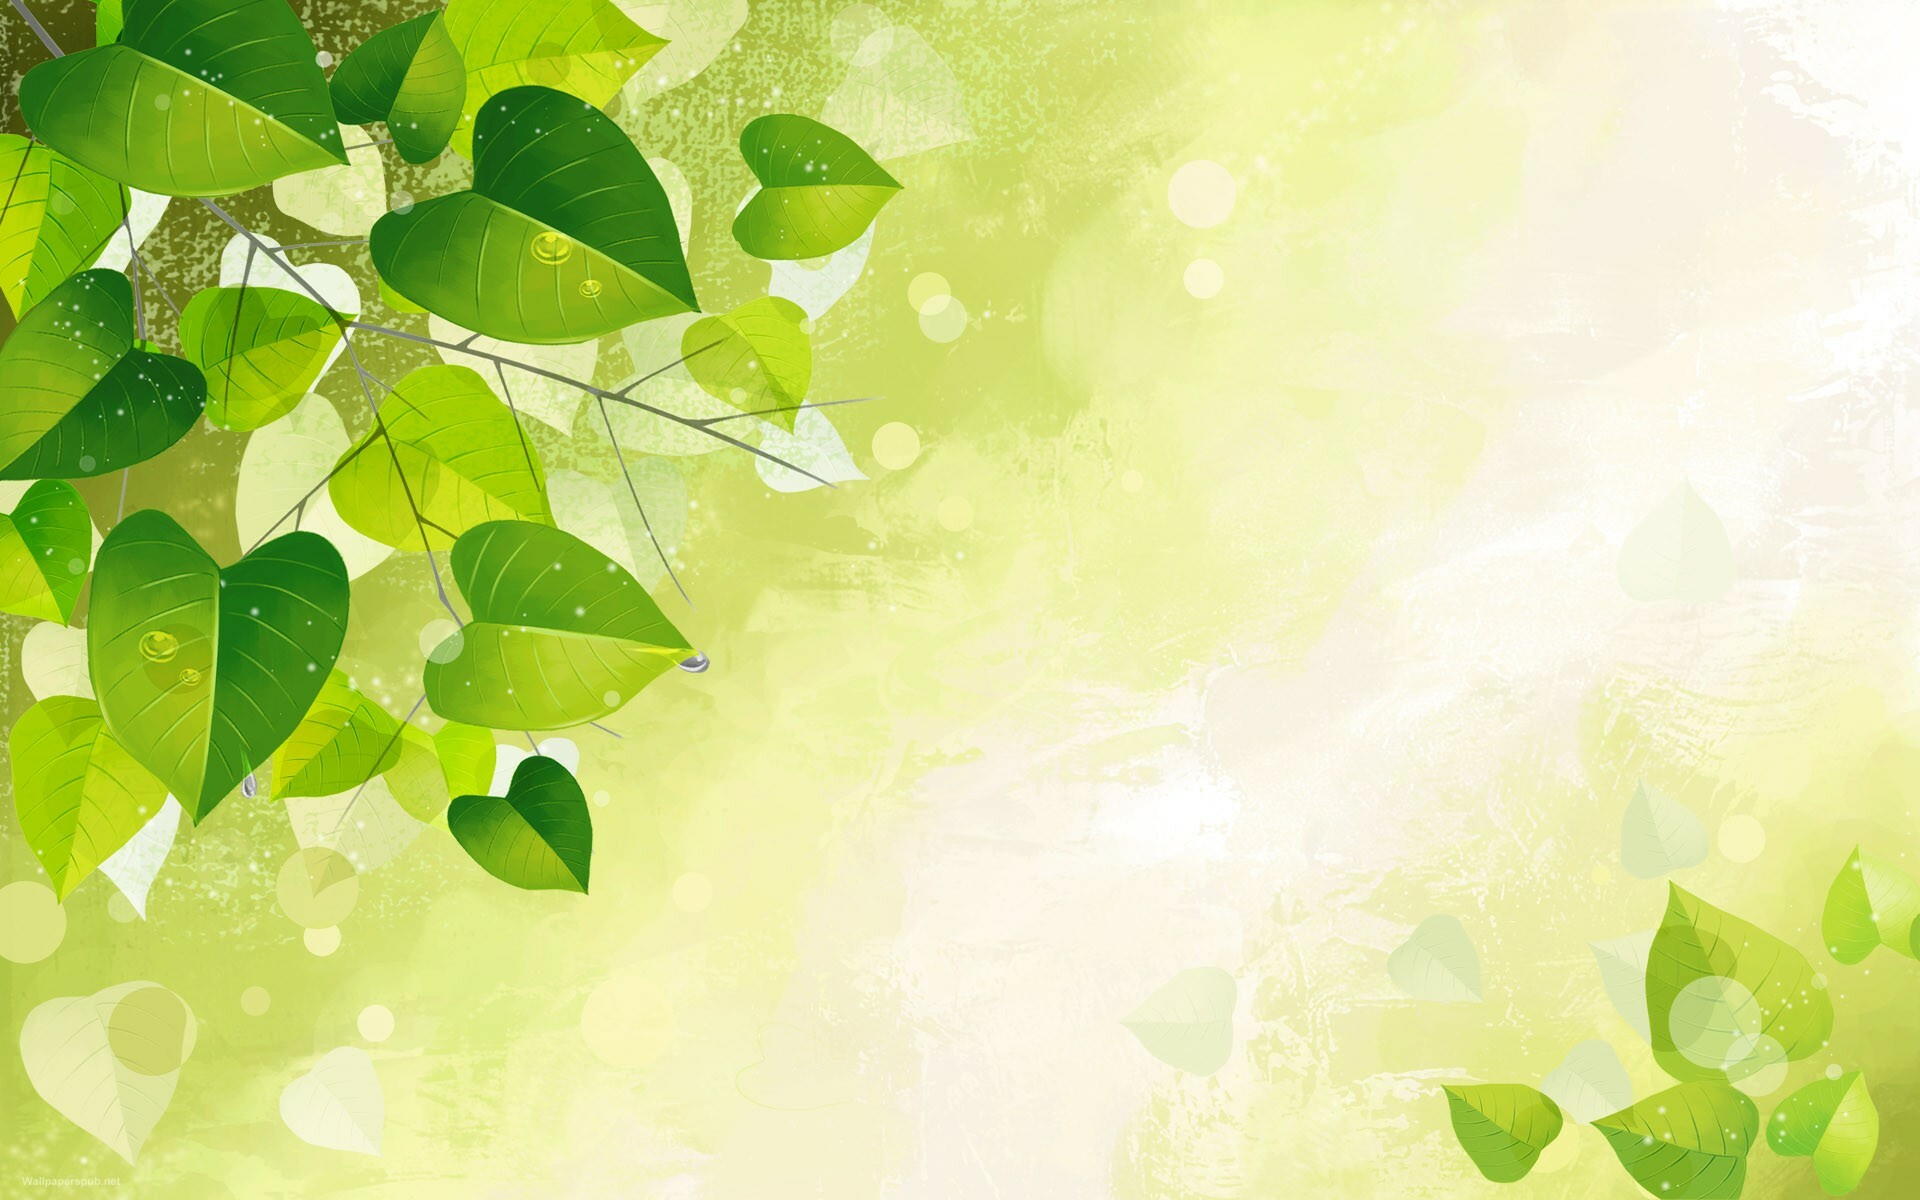 Leaf: Organs that help the plants exchange gases in the atmosphere. 1920x1200 HD Wallpaper.